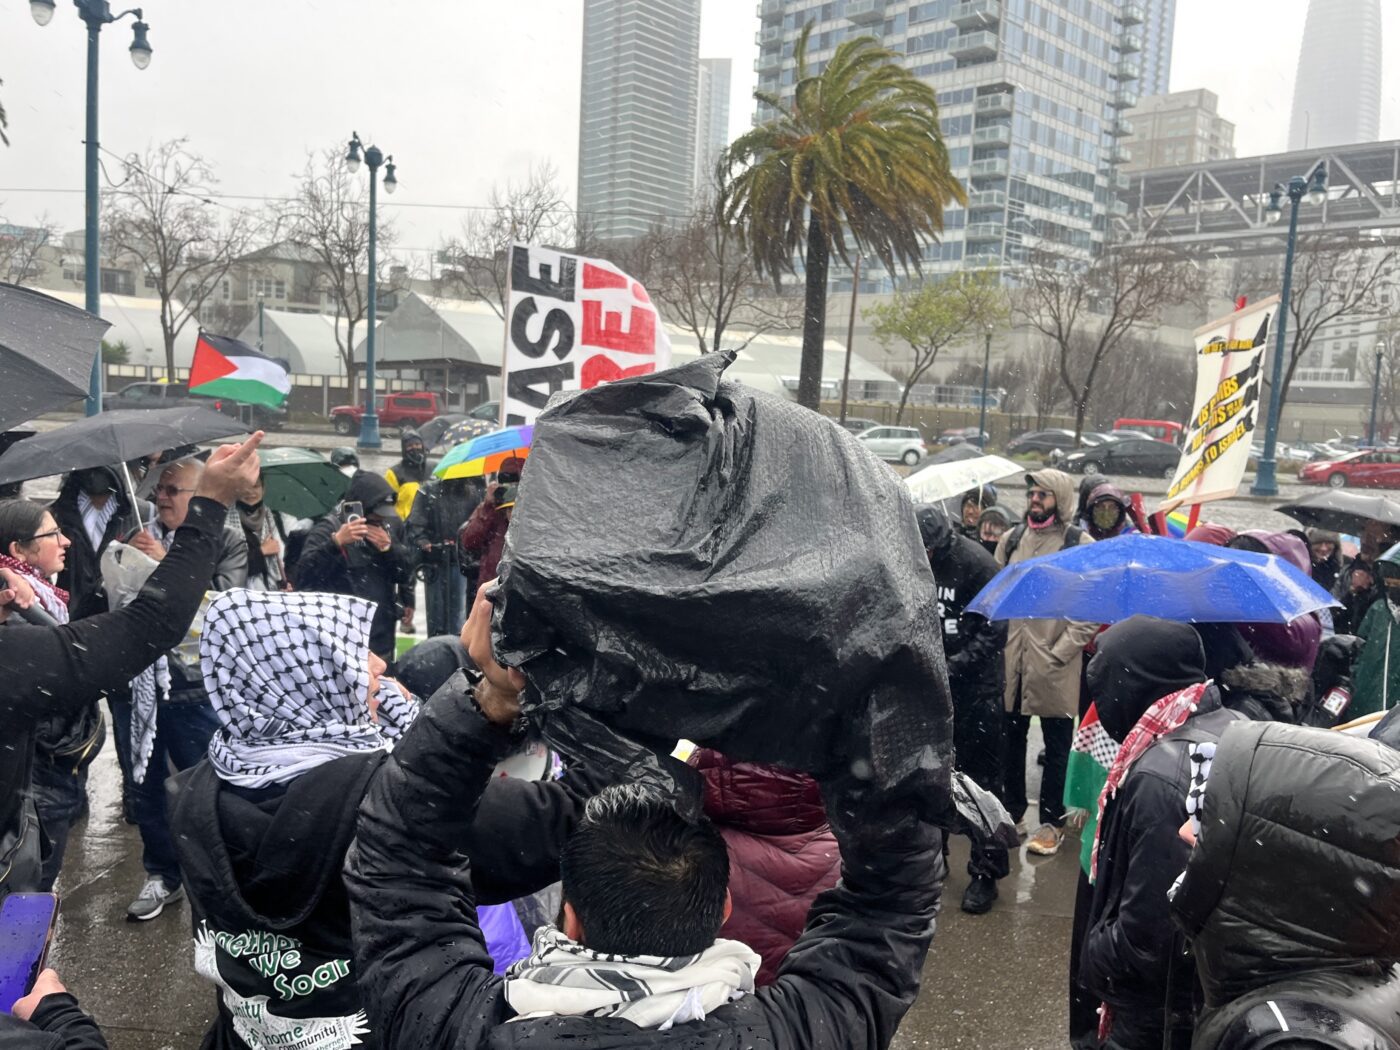 Pro-Palestinian-protesters-Pier-30-to-halt-departure-of-USNS-Harvey-Milk-to-Israel-032924-by-Griffin-1-1400x1050, Palestinian organizers protest Navy vessel said to be headed to Israel, Featured Local News & Views World News & Views 